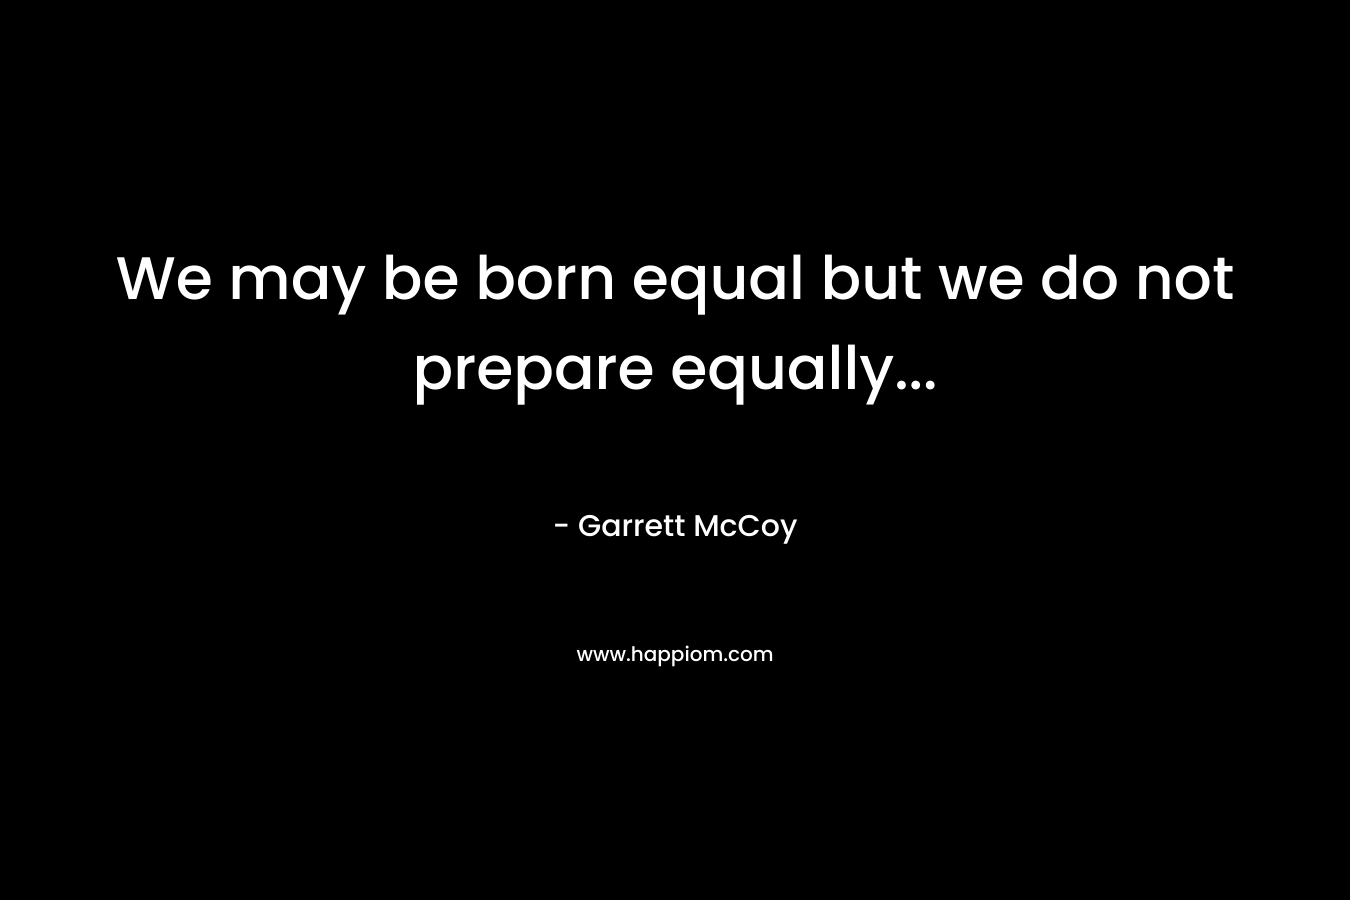 We may be born equal but we do not prepare equally...